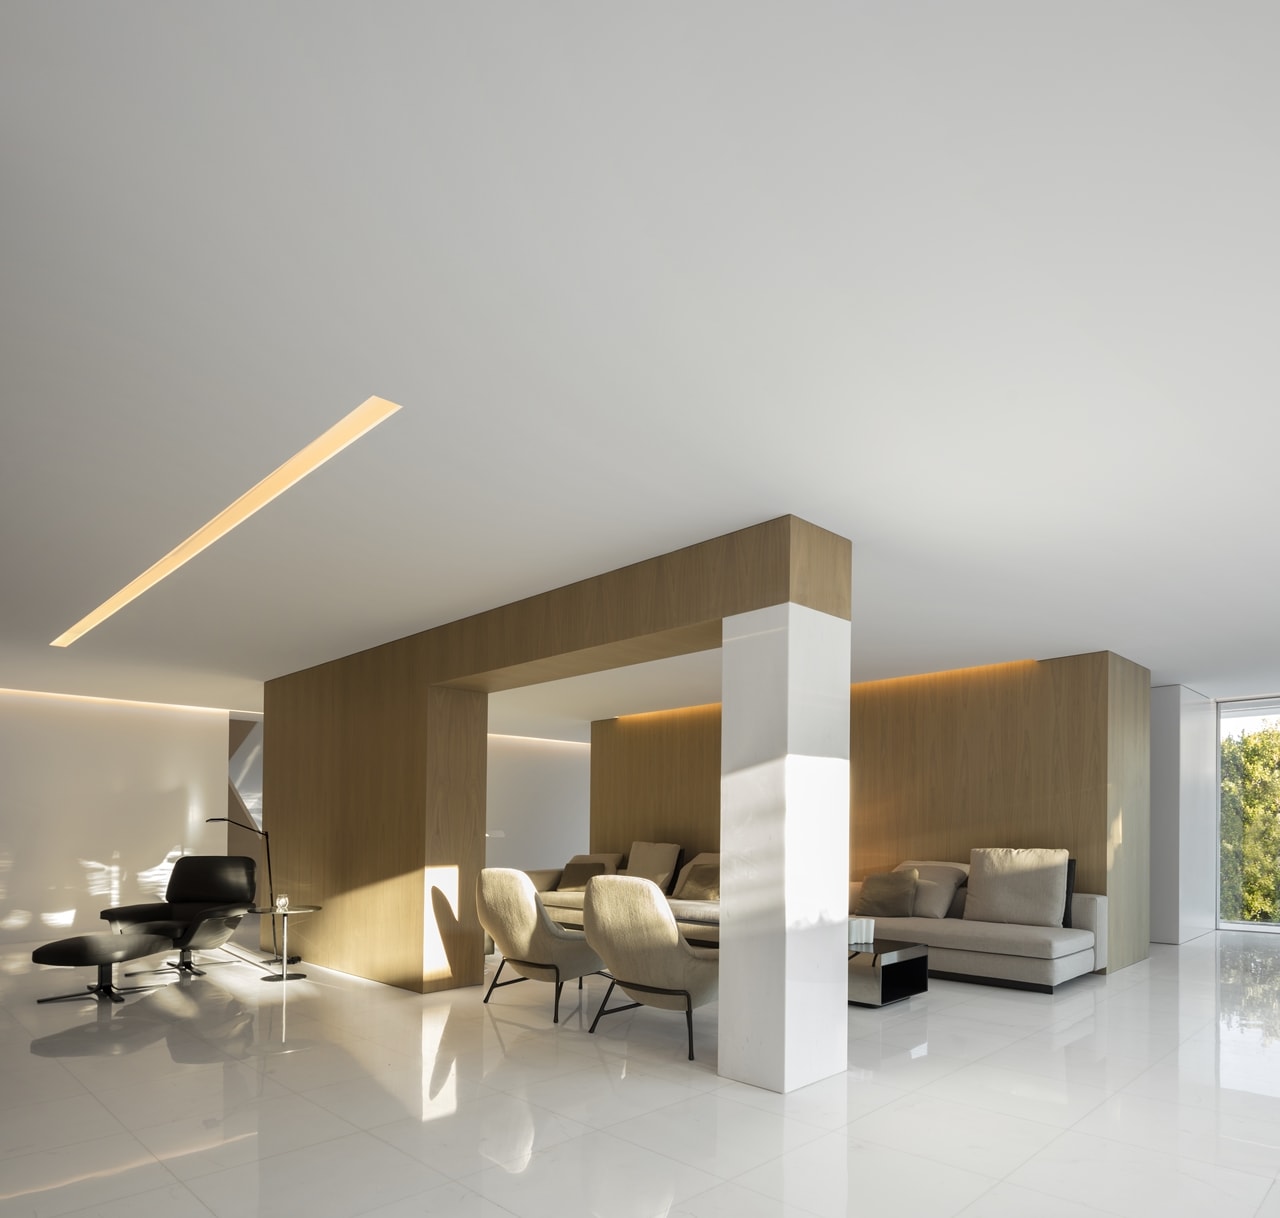 Open concept living room in minimalist house designed by Fran Silvestre Architects